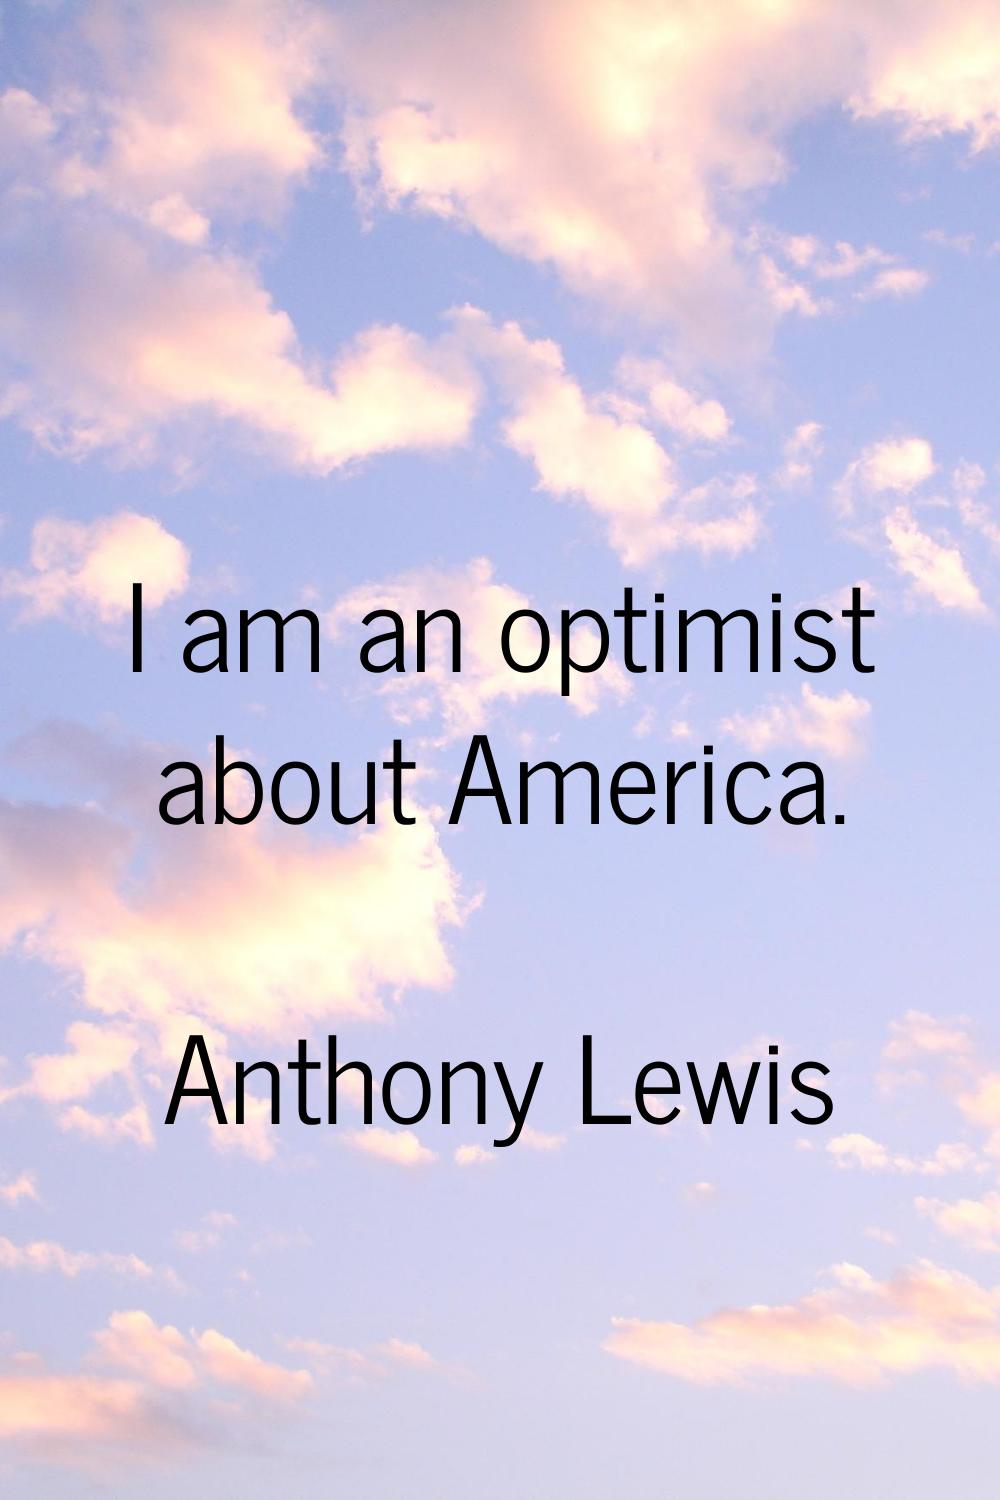 I am an optimist about America.